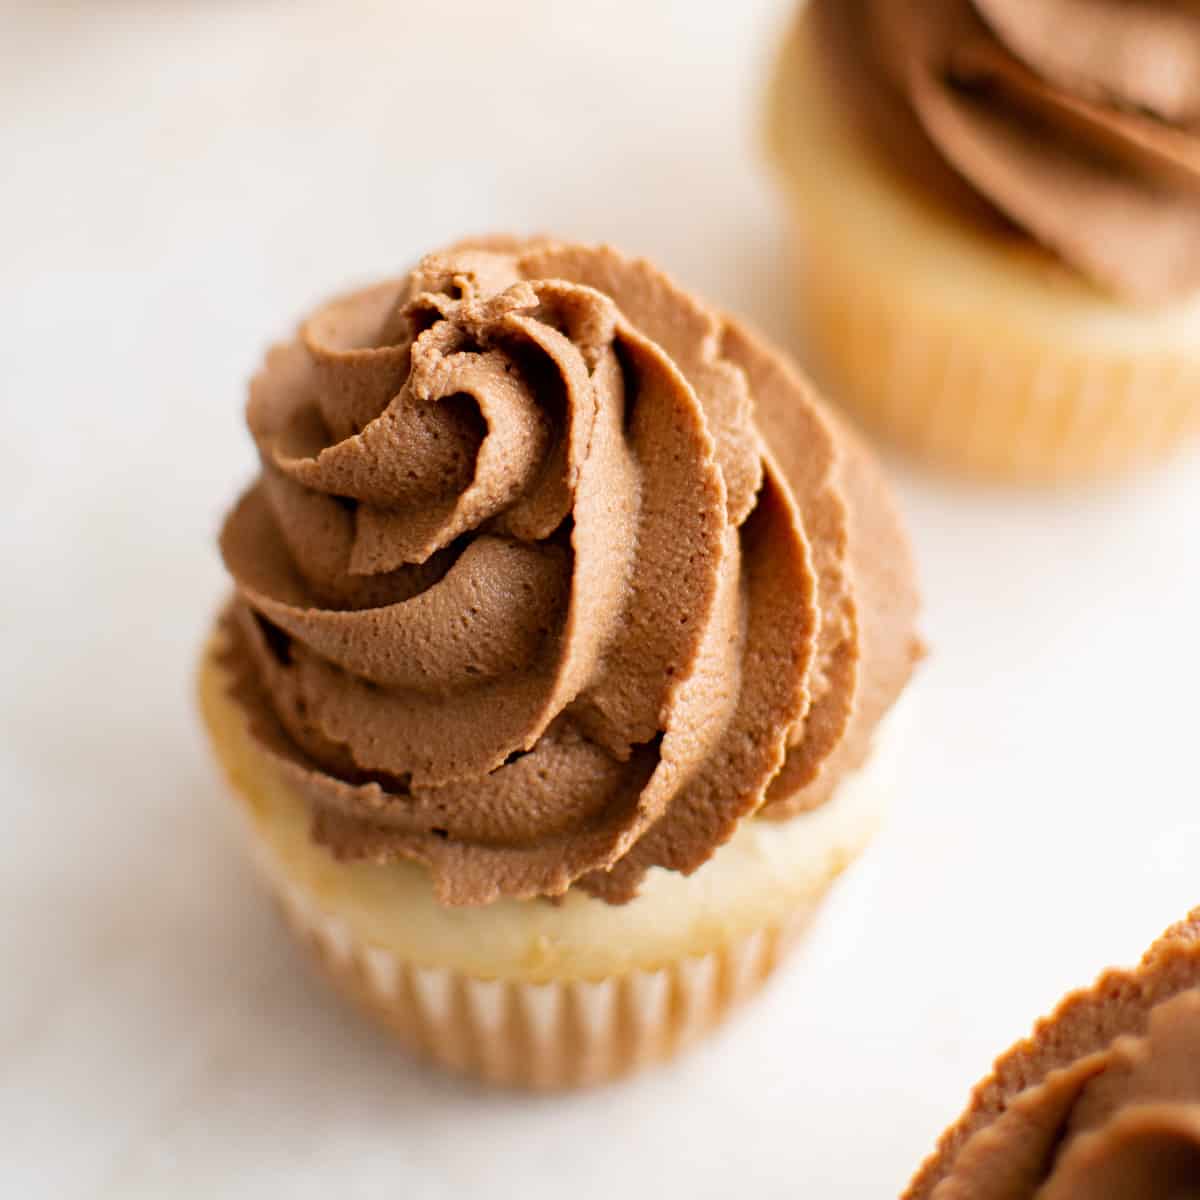 Nutella frosting